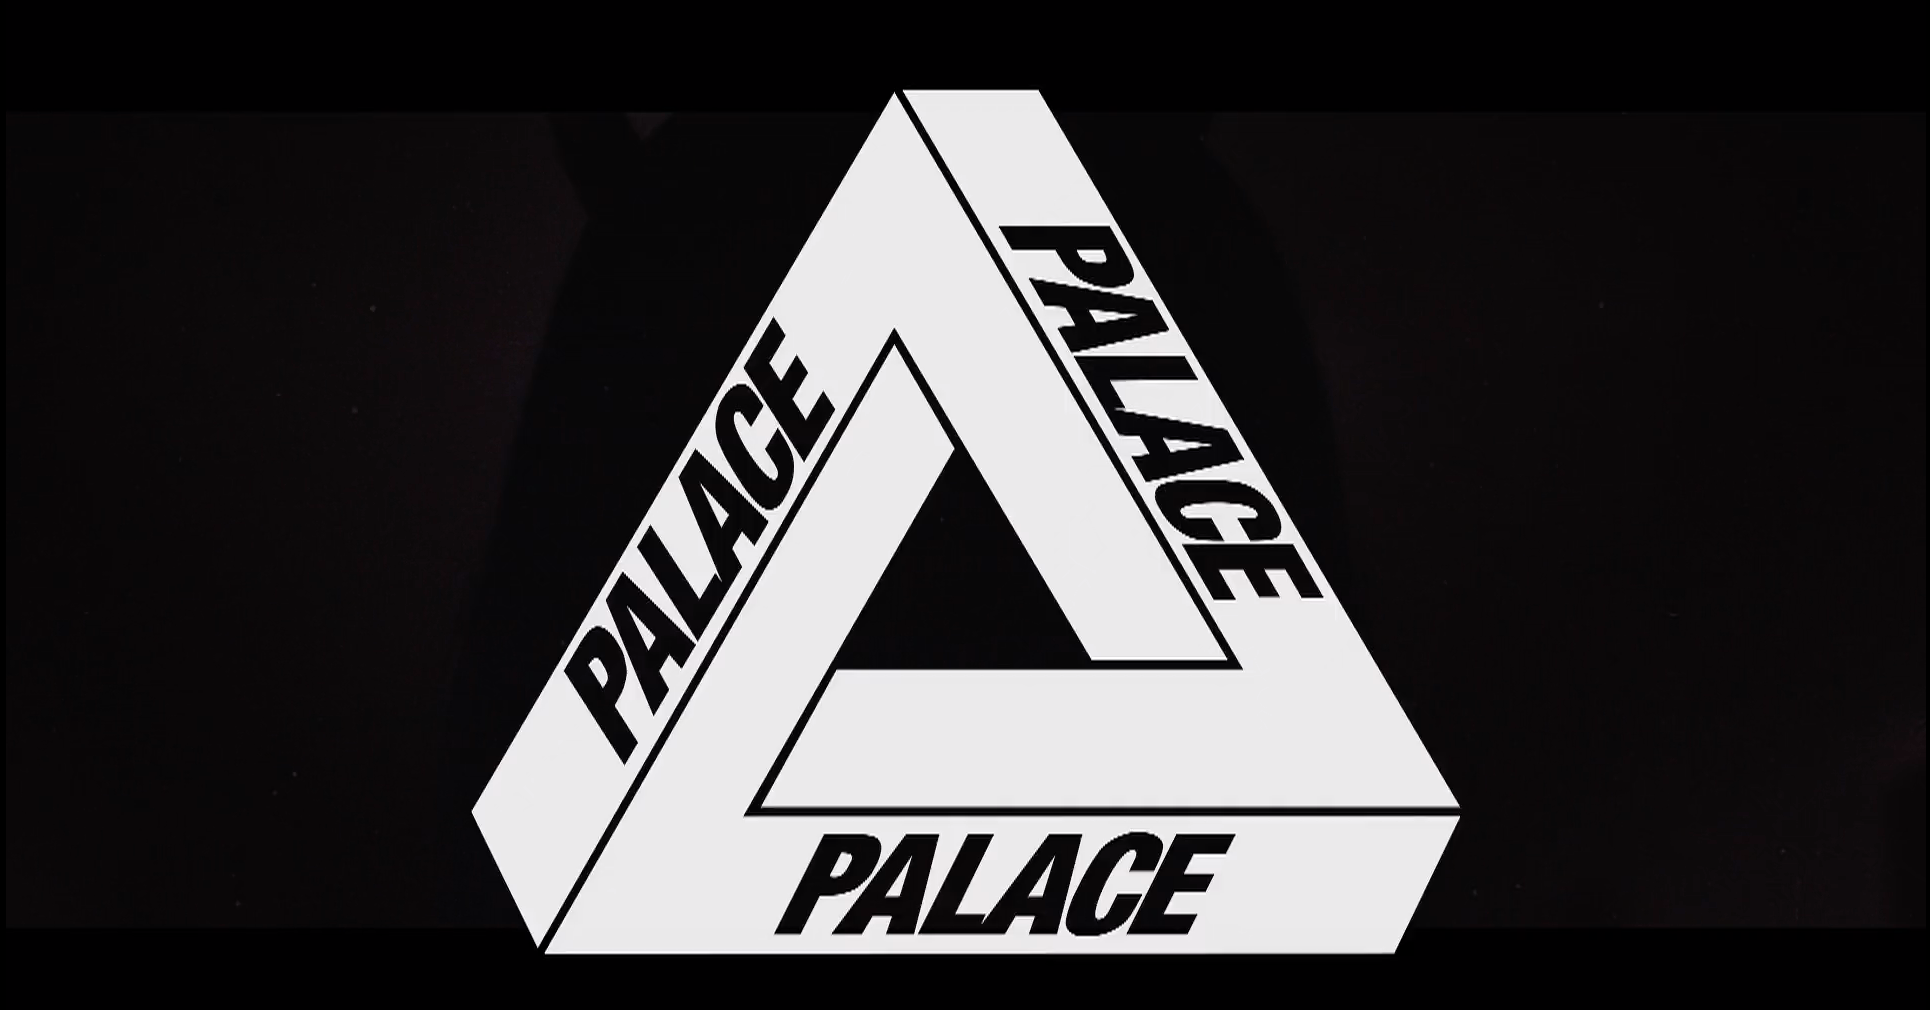 Palace Announce Tokyo Store Opening with Horror Parody Ad